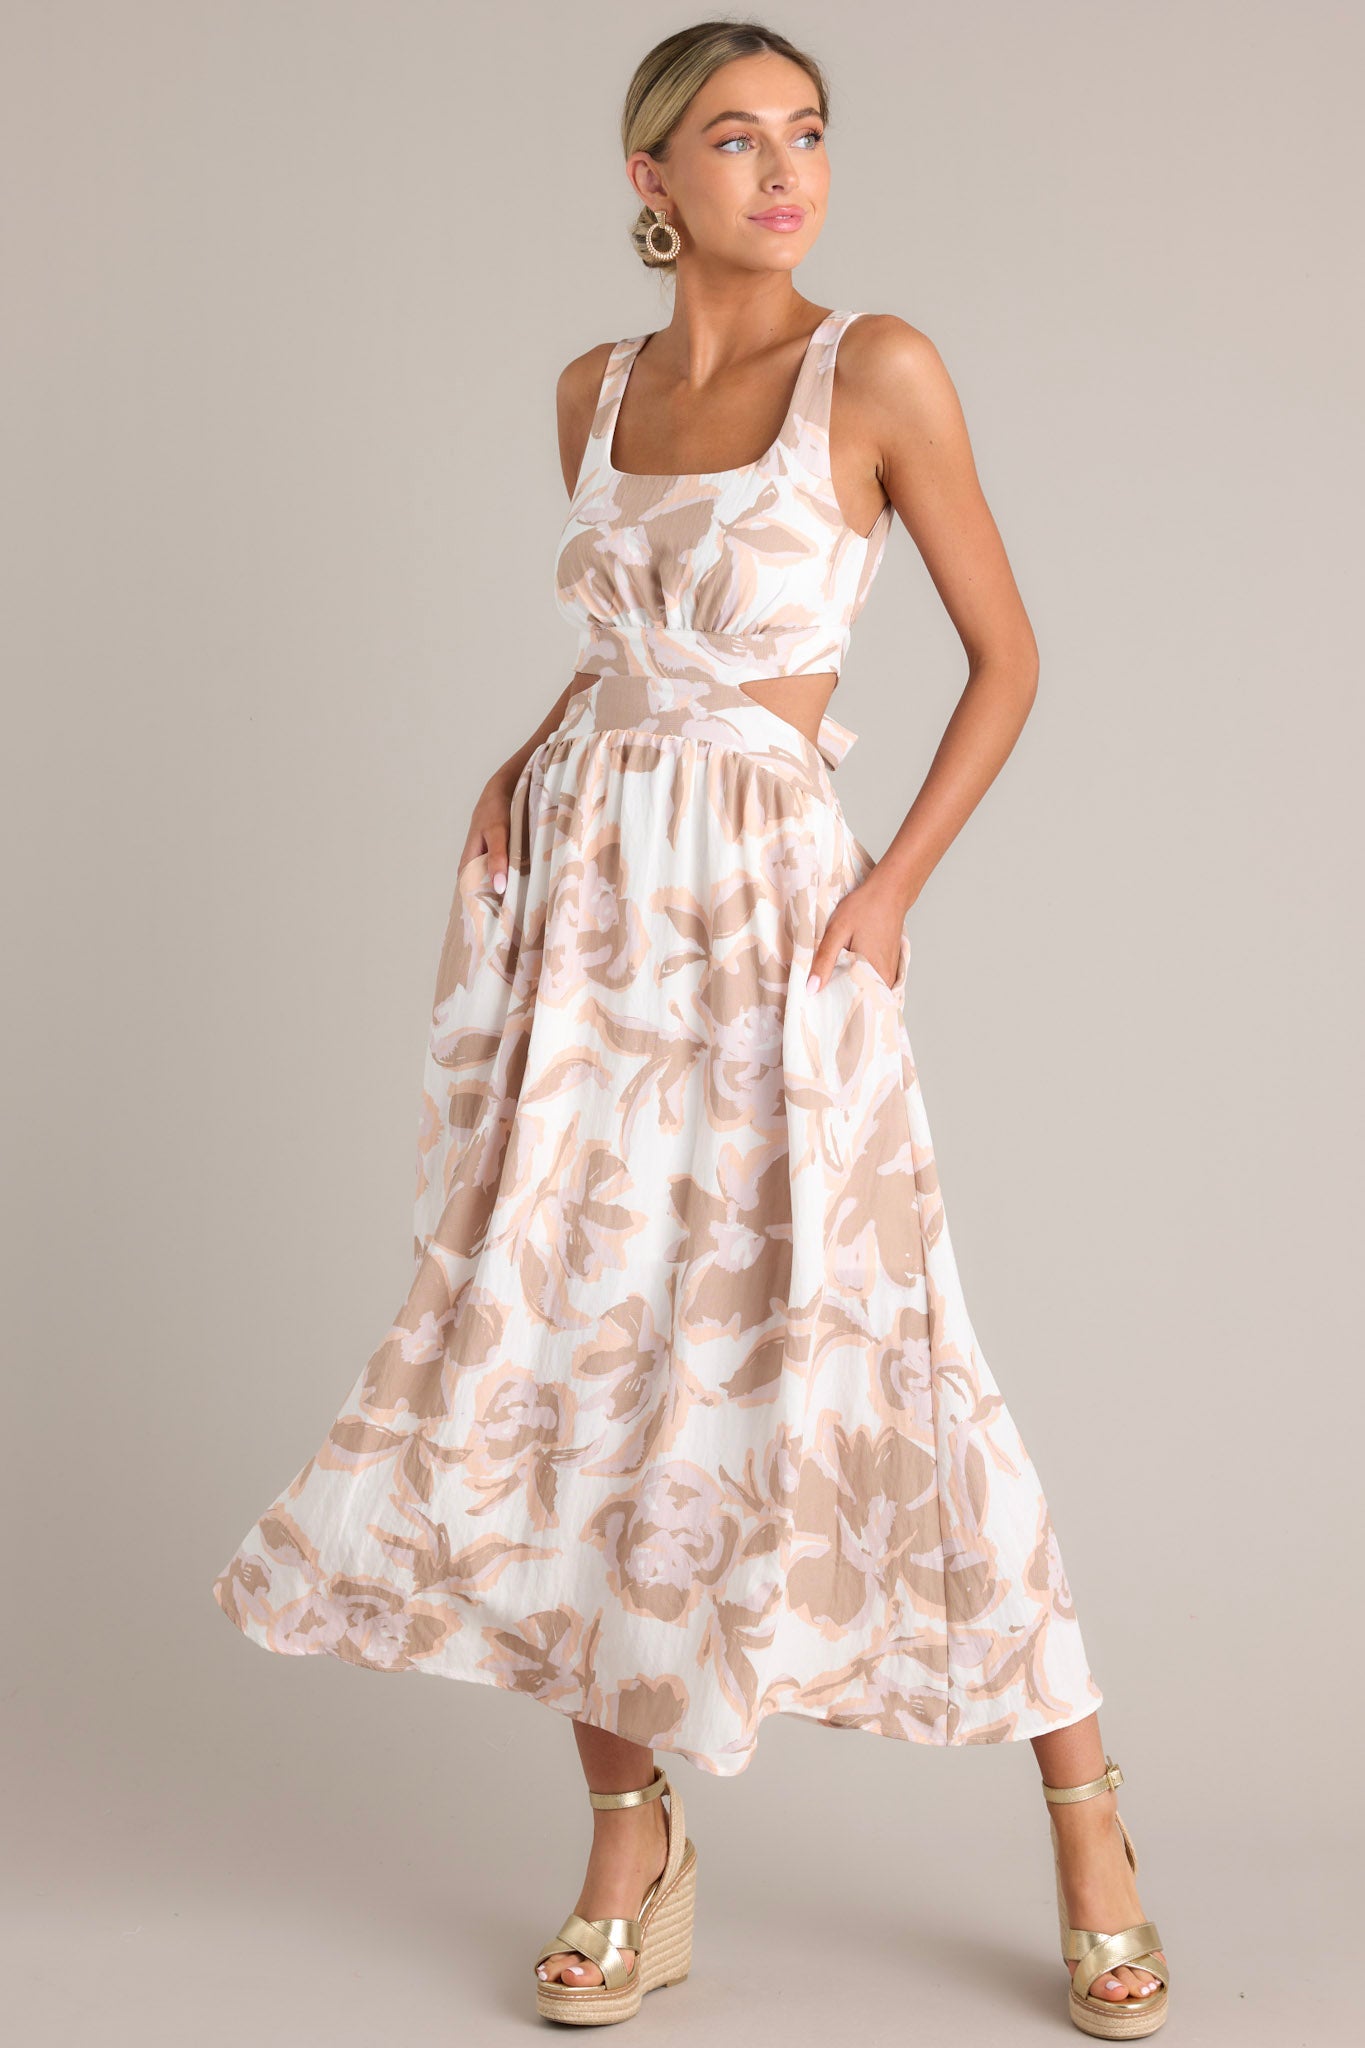 Action shot of a white maxi dress with a square neckline, thick straps, self-tie back feature, waist cutouts, functional hip pockets, and an all-over floral pattern, highlighting the flow and design.